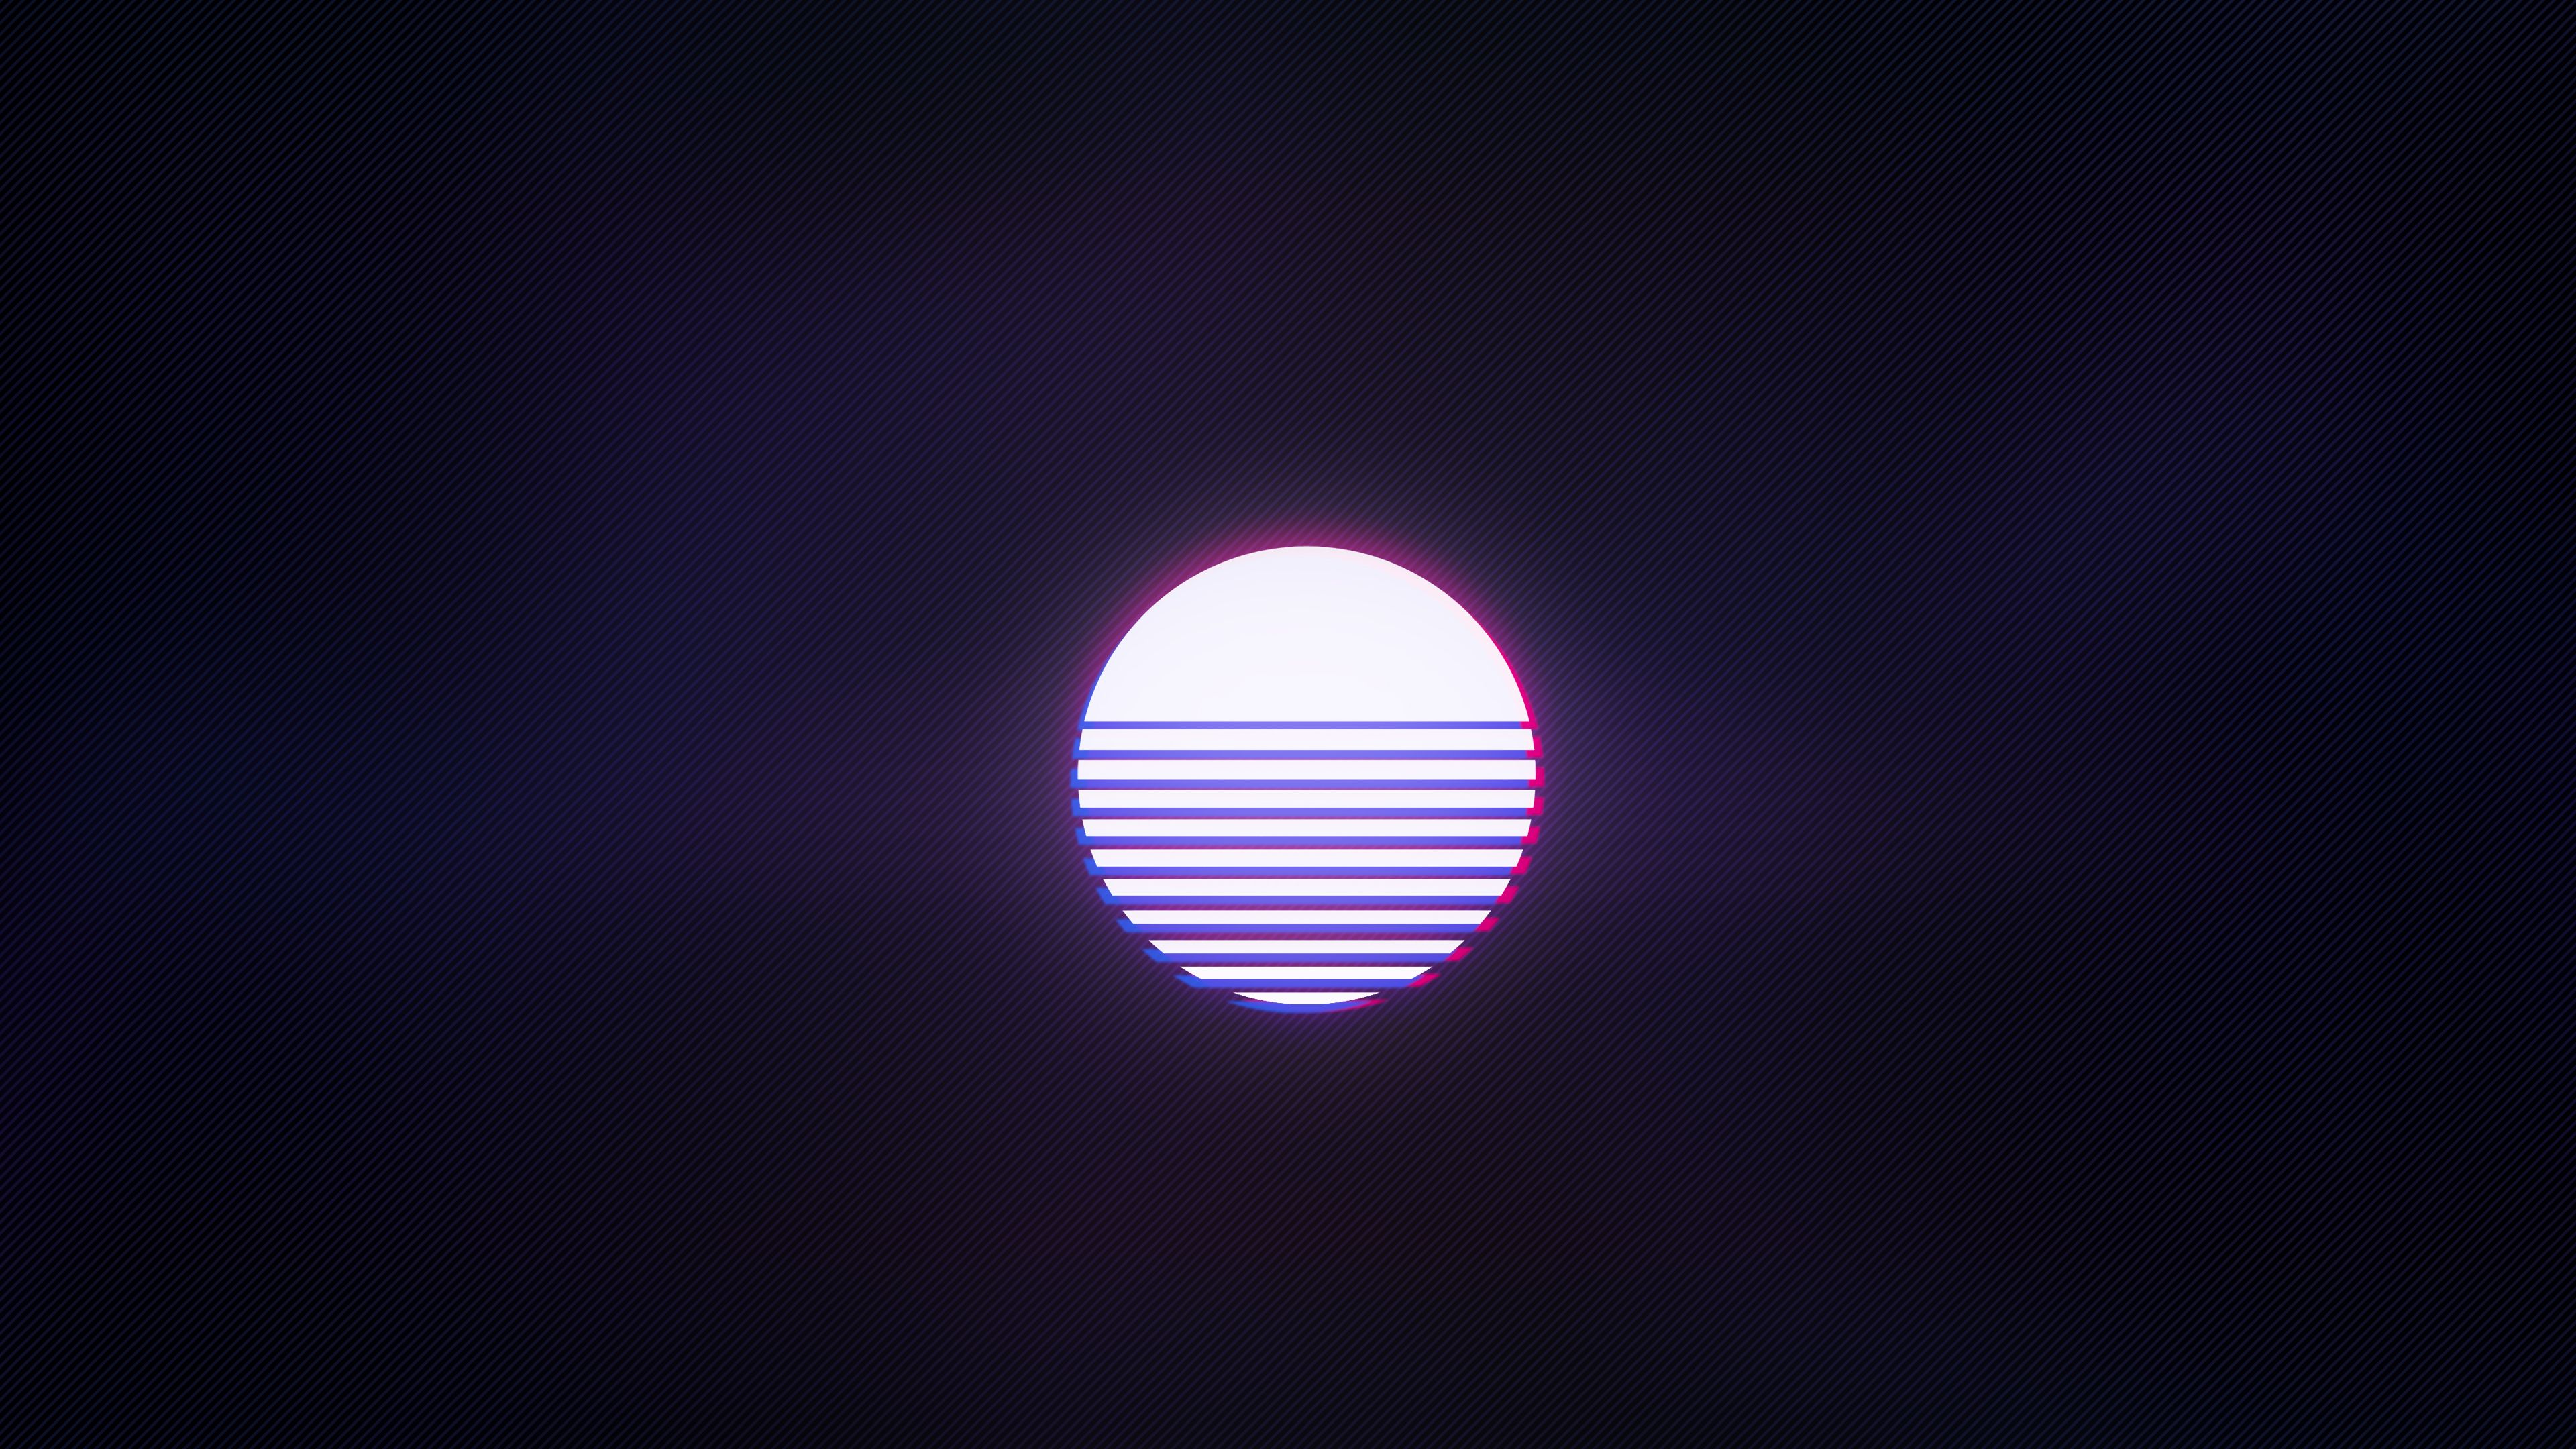 Synthwave white sun 4k Ultra HD Wallpaper. Background Image